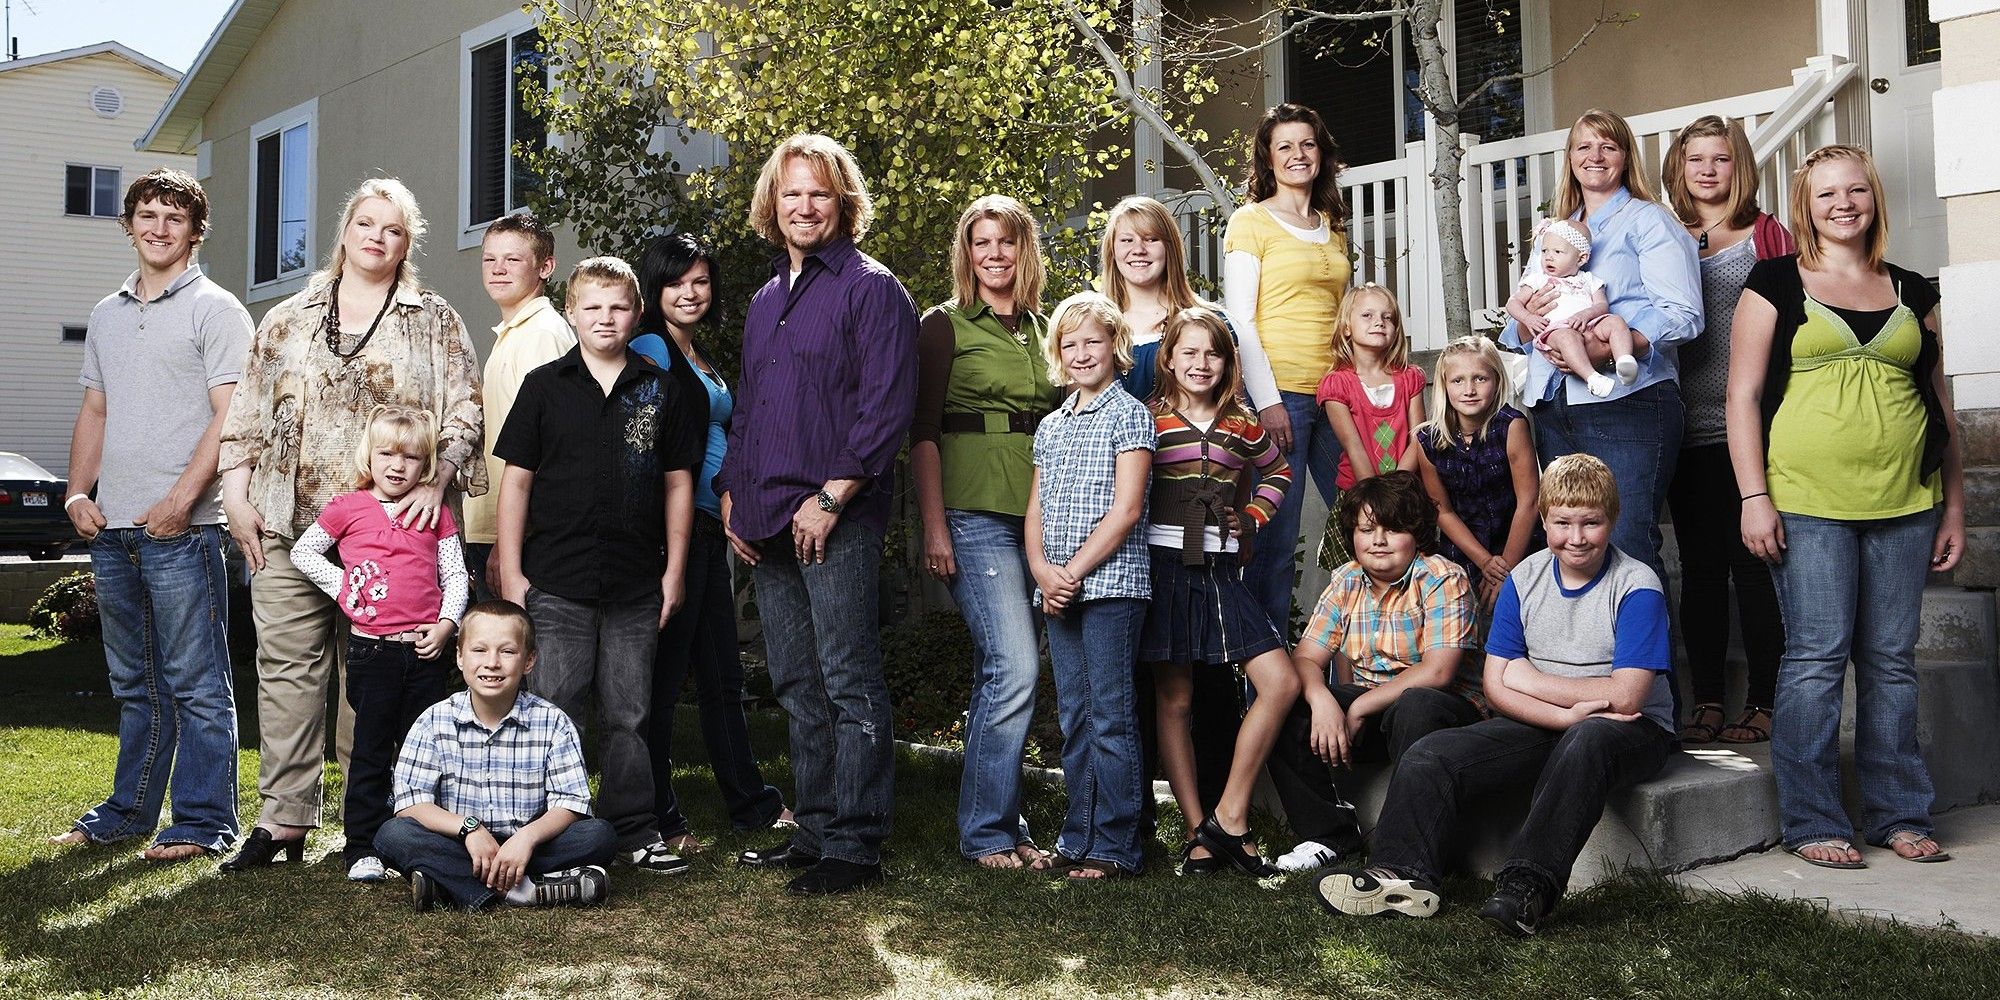 Sister Wives Family posing together outside of house